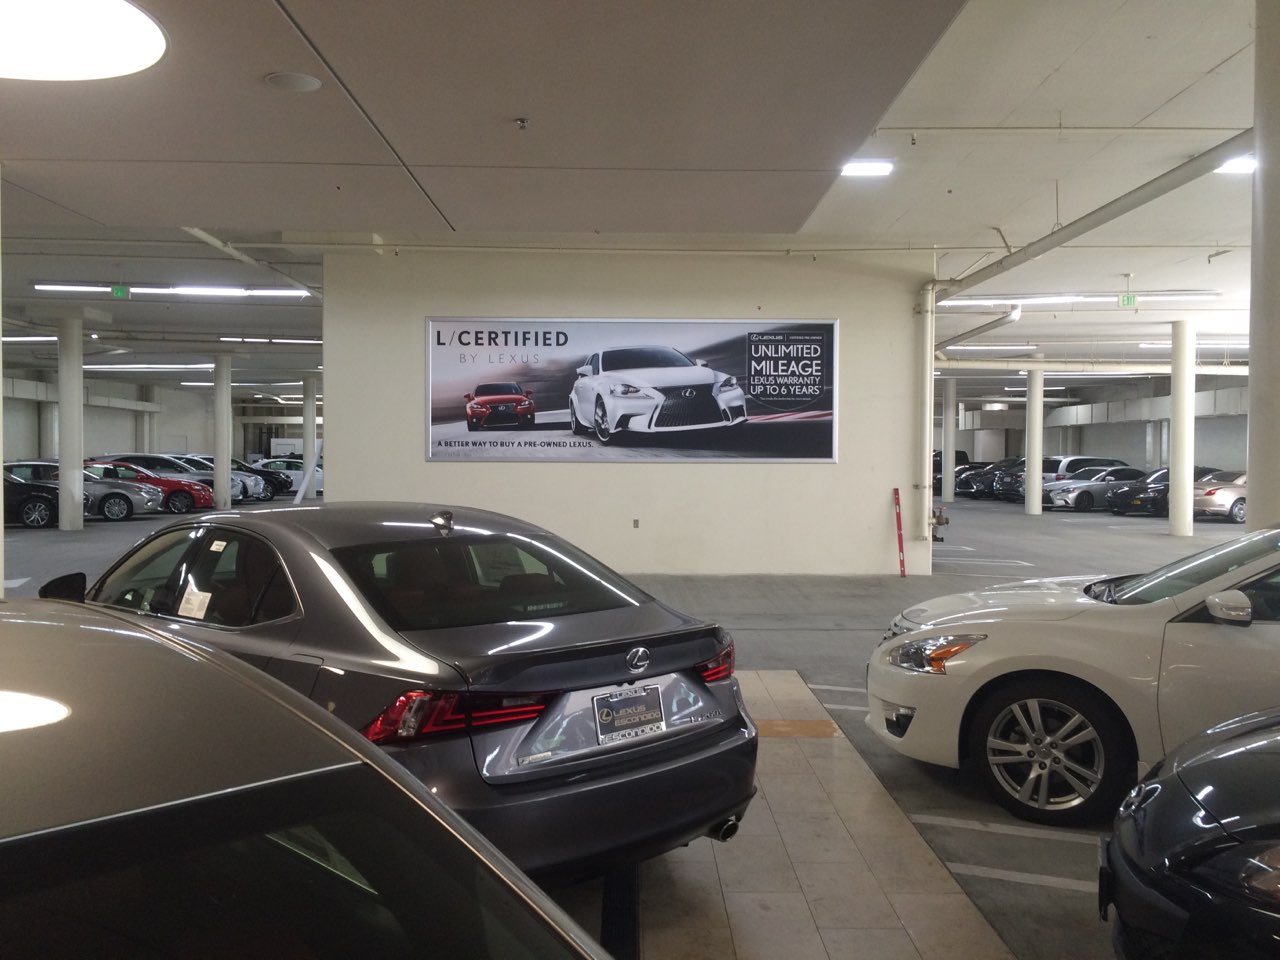 Ackland Frame Banners in San Diego County CA